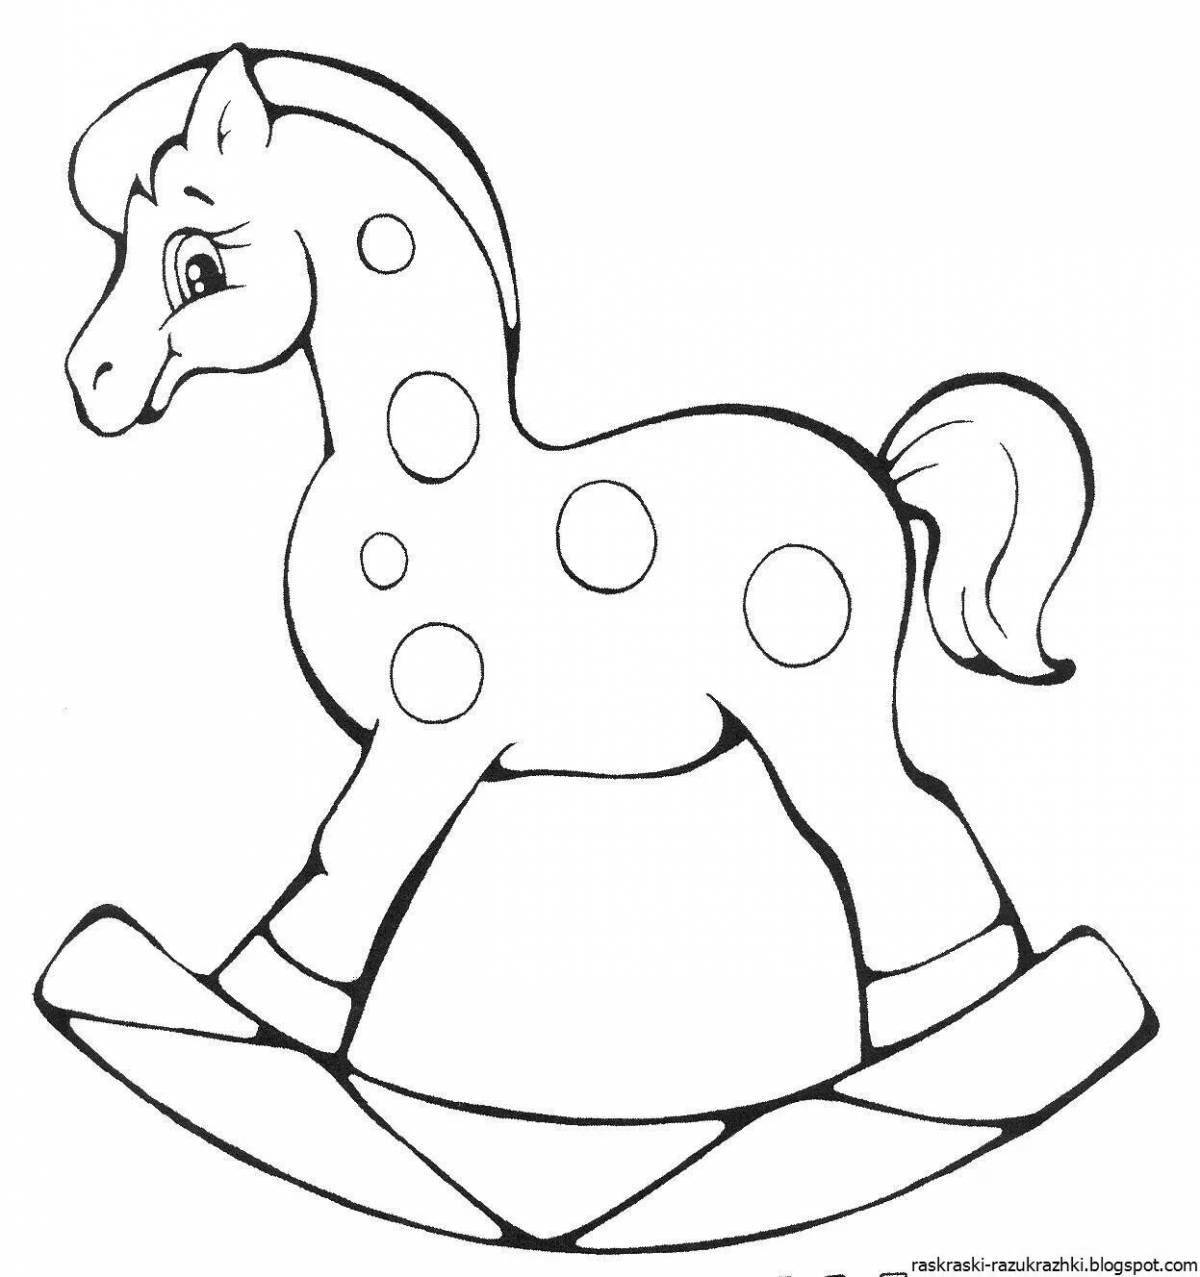 Fantastic horse coloring book for 2-3 year olds